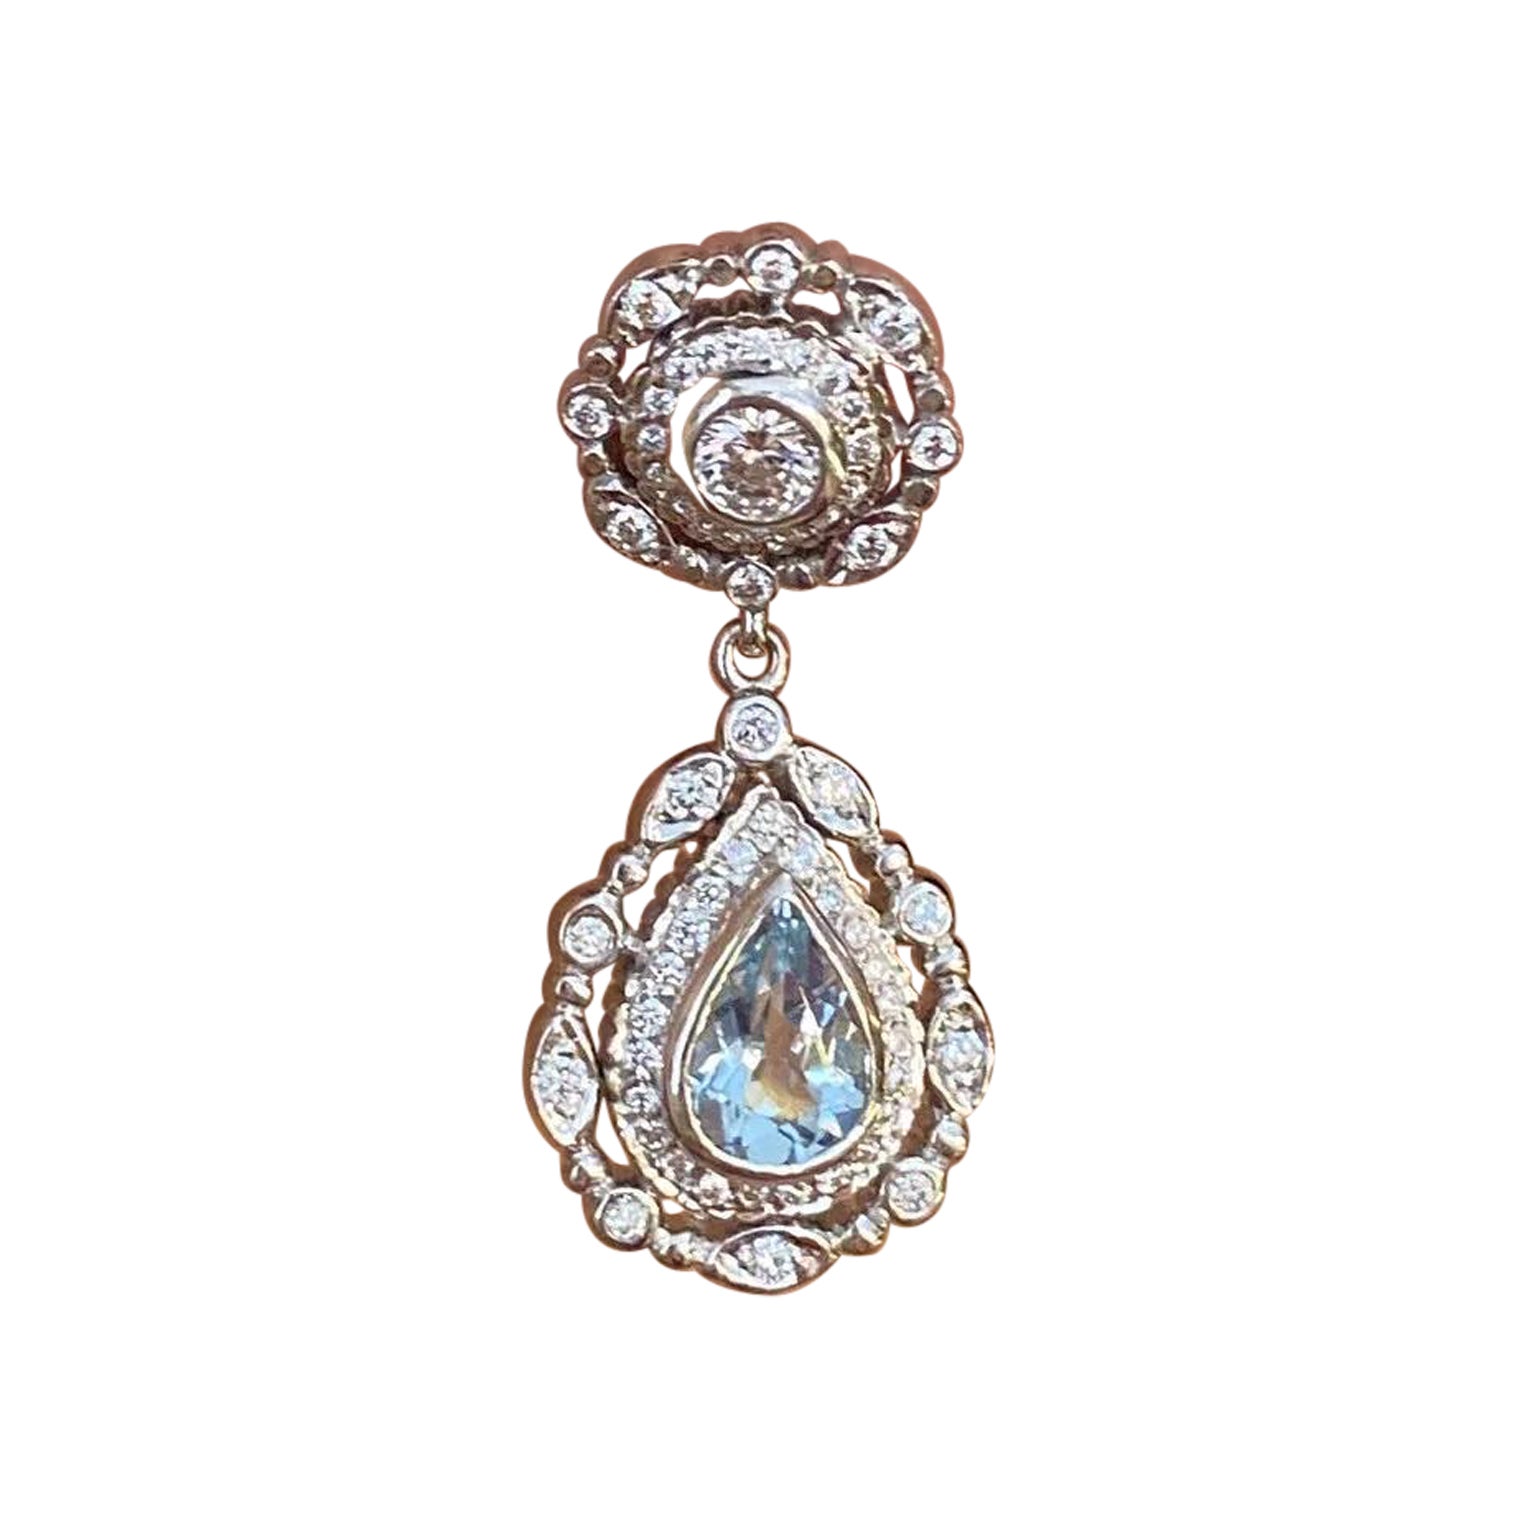 Doris Panos Aquamarine and Diamond Drop Earrings in 18k White Gold For Sale